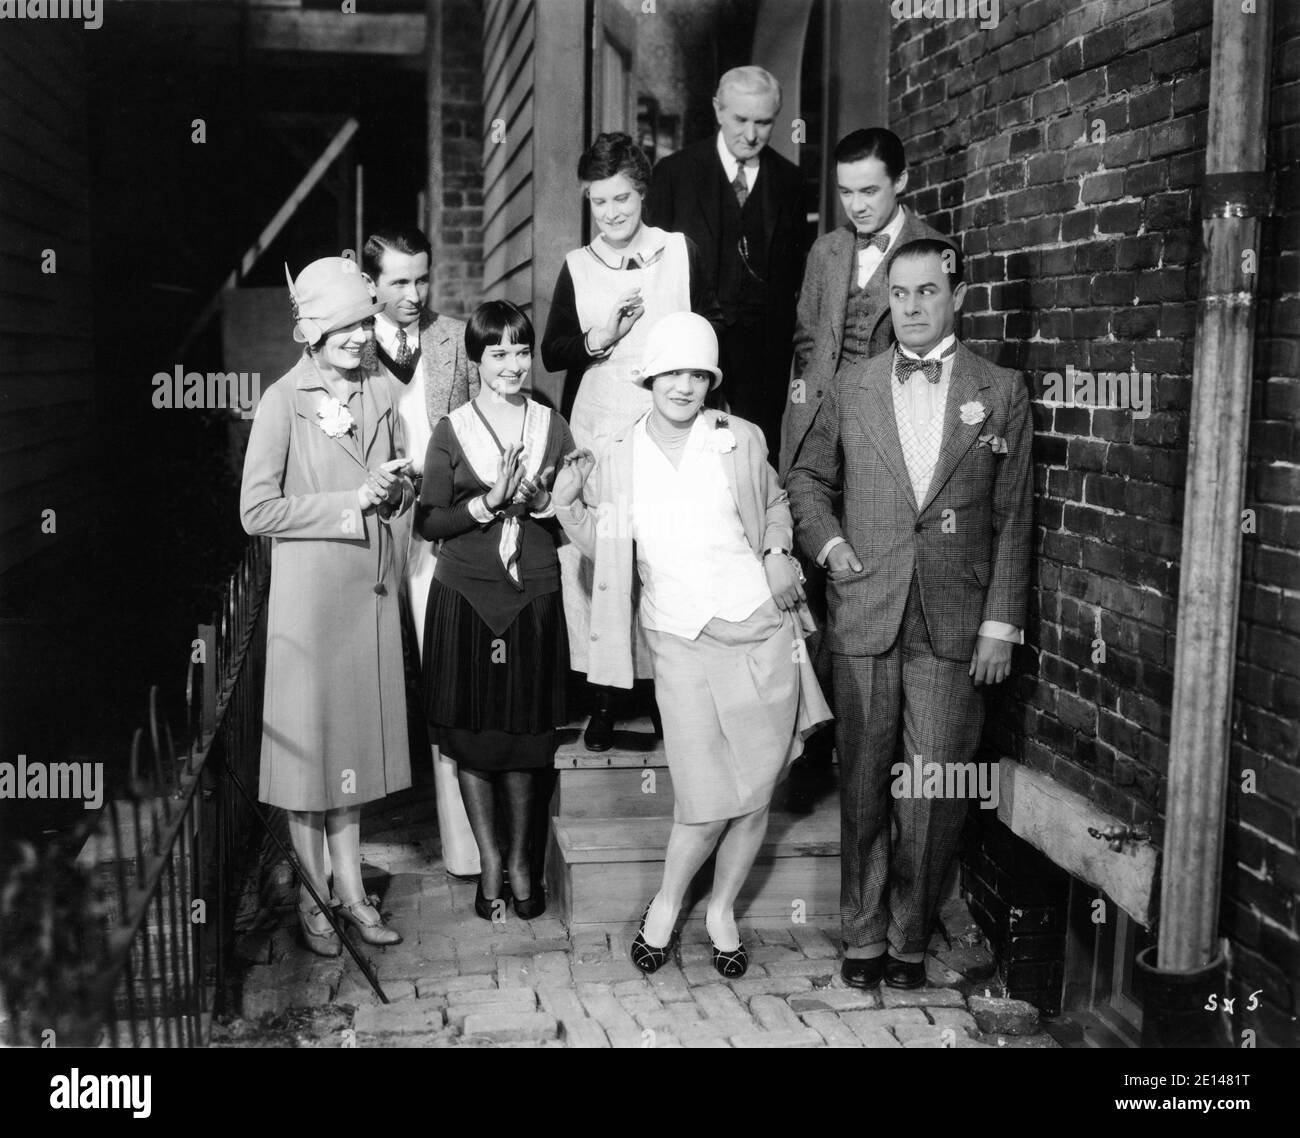 LOIS WILSON Director MAL ST. CLAIR LOUISE BROOKS CLAIRE McDOWELL CHARLES W. GOODRICH GREGORY KELLY and FORD STERLING on set candid with Set Visitor WILMA NOVAK Charleston Champion of New York (centre)  at the Paramount Astoria Studios during the filming of THE SHOW - OFF 1926 director MALCOLM ST. CLAIR from the play by George Kelly Paramount Pictures Stock Photo